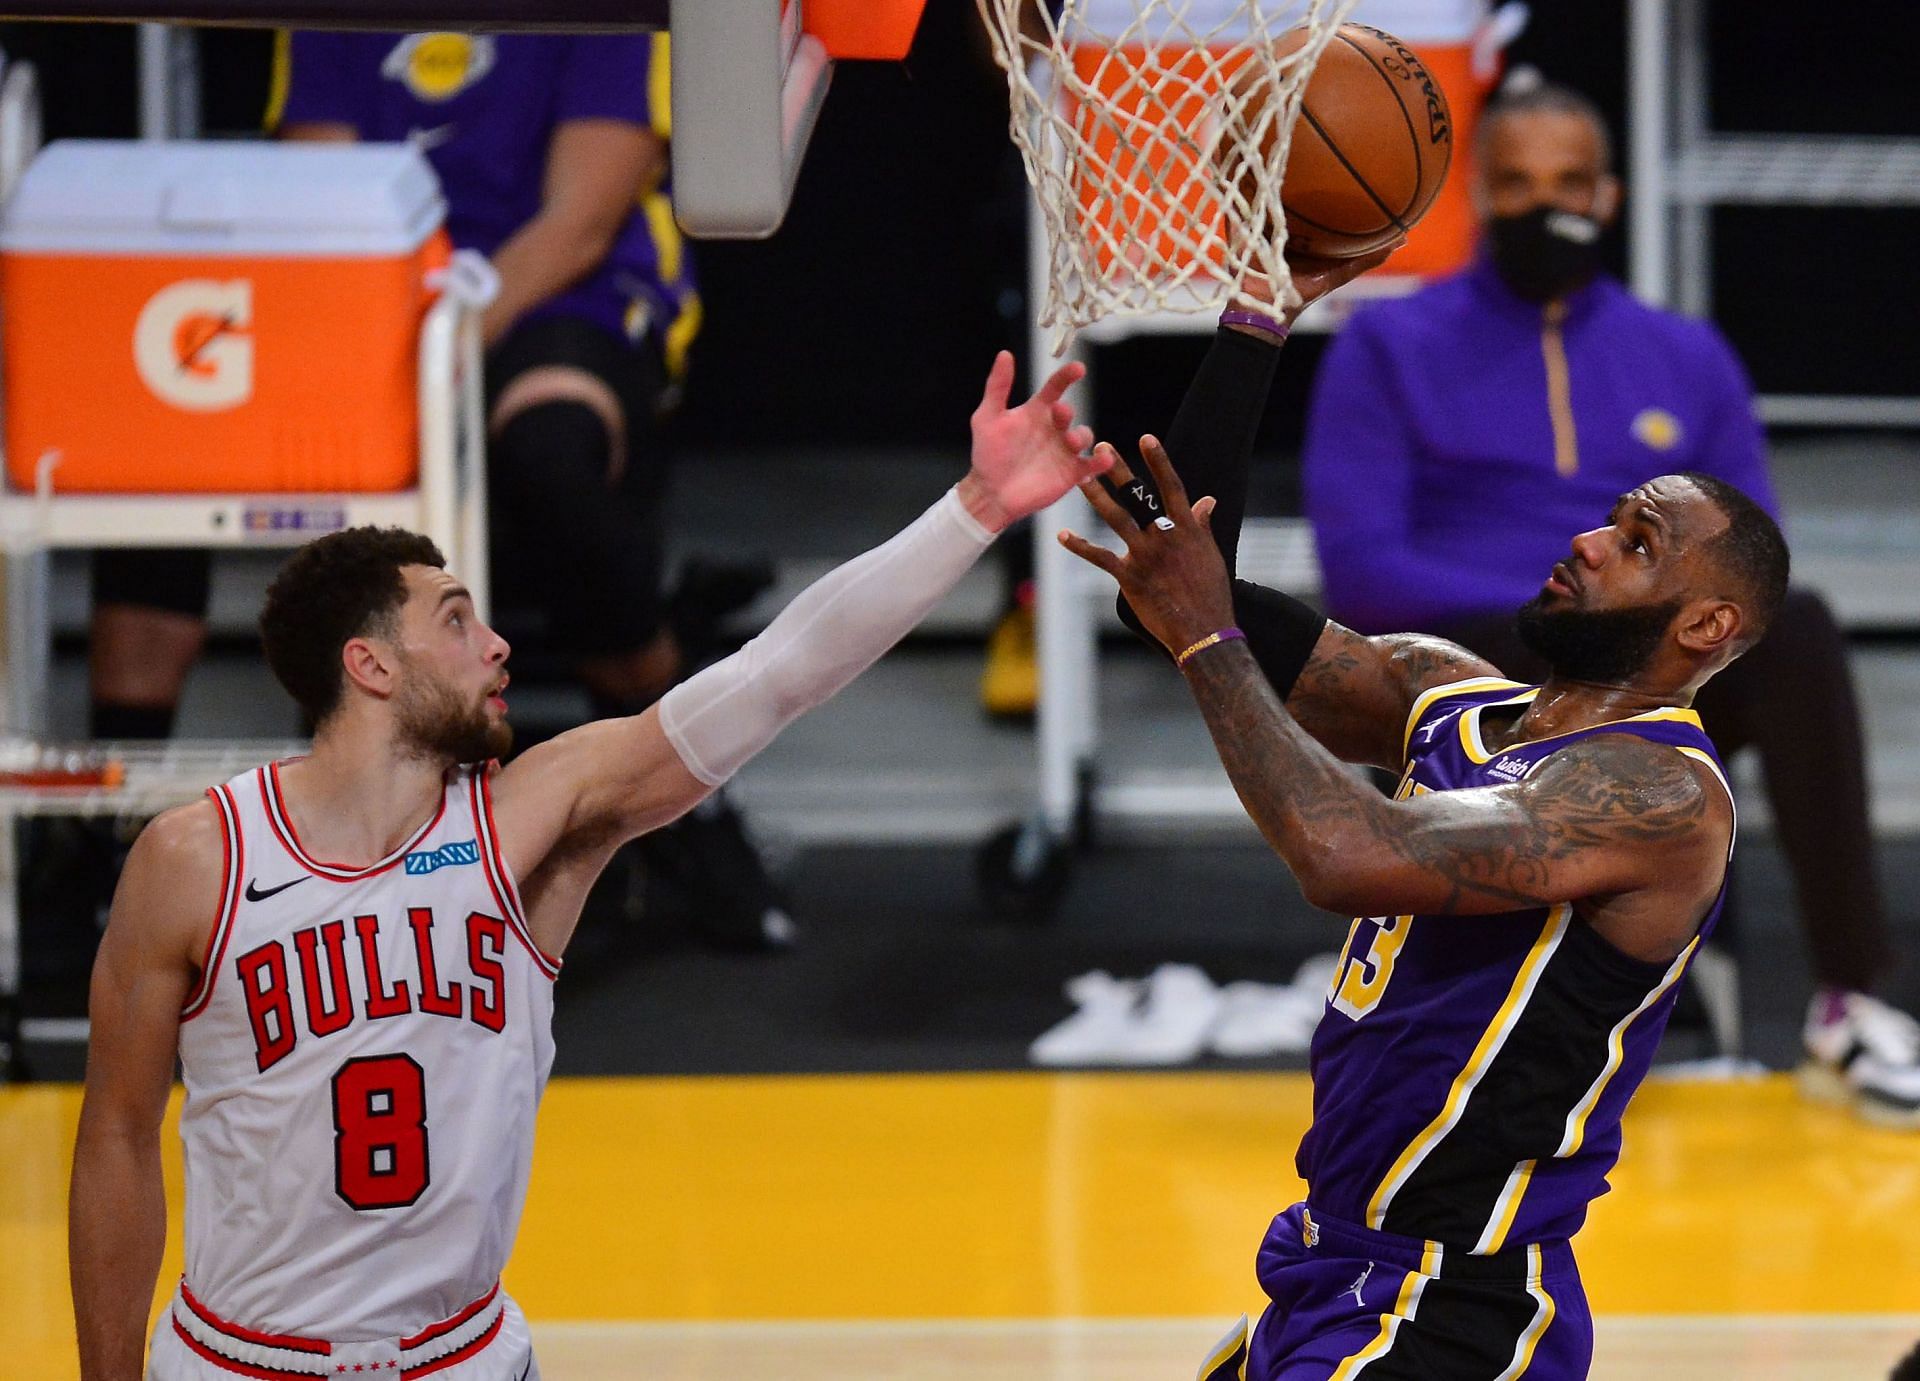 The Chicago Bulls are hoping for back-to-back wins against both LA teams [Photo: Reuters]